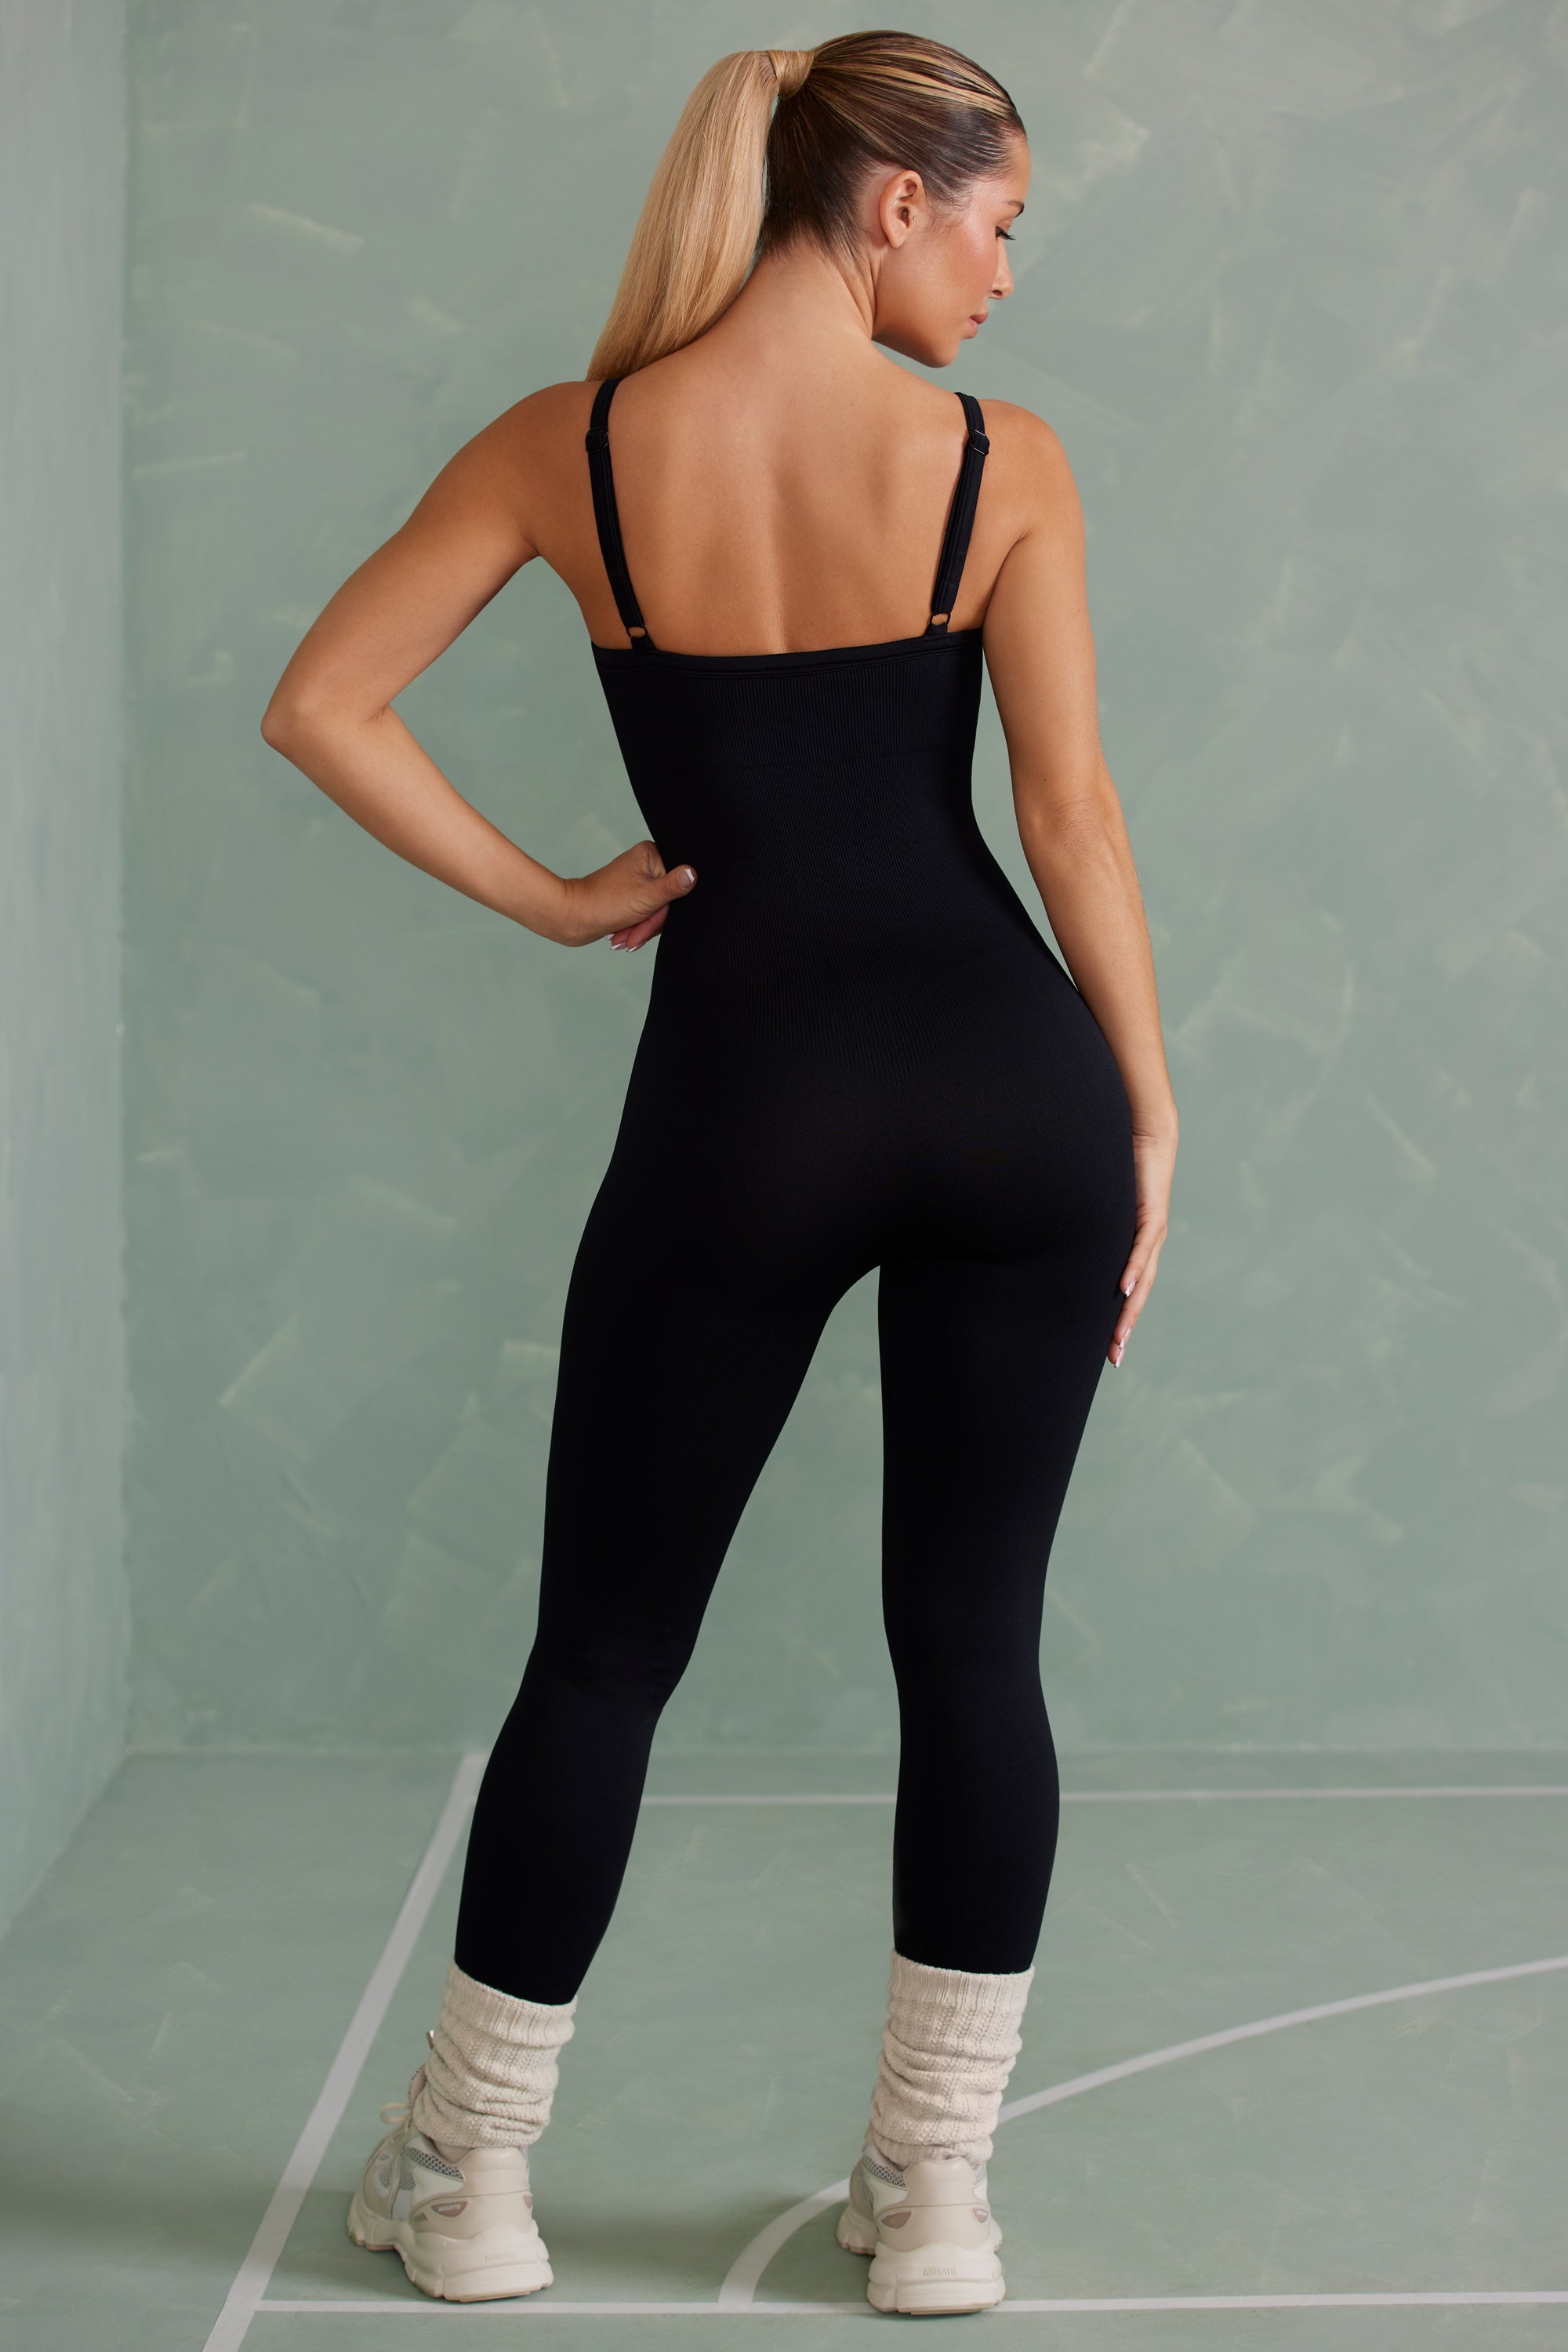 Double Sided Buff Nylon Yoga Black Spandex Jumpsuit With High Elasticity  For Womens Sports LU 1449 From Lee_hee, $24.93